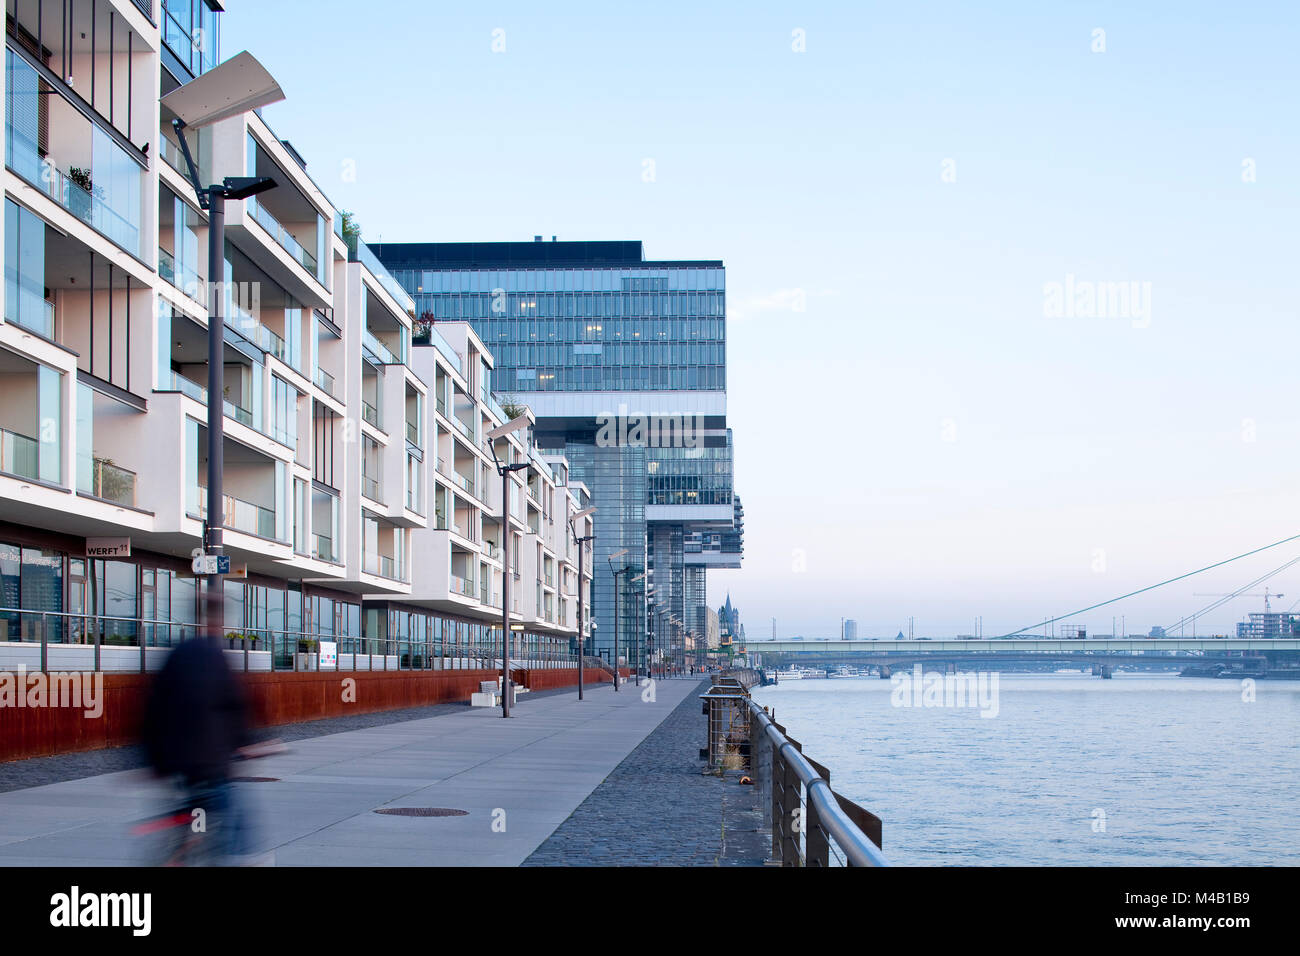 Urban development project in the old industrial harbour 'Rheinauhafen' at the river Rhine in Cologne, Germany Stock Photo